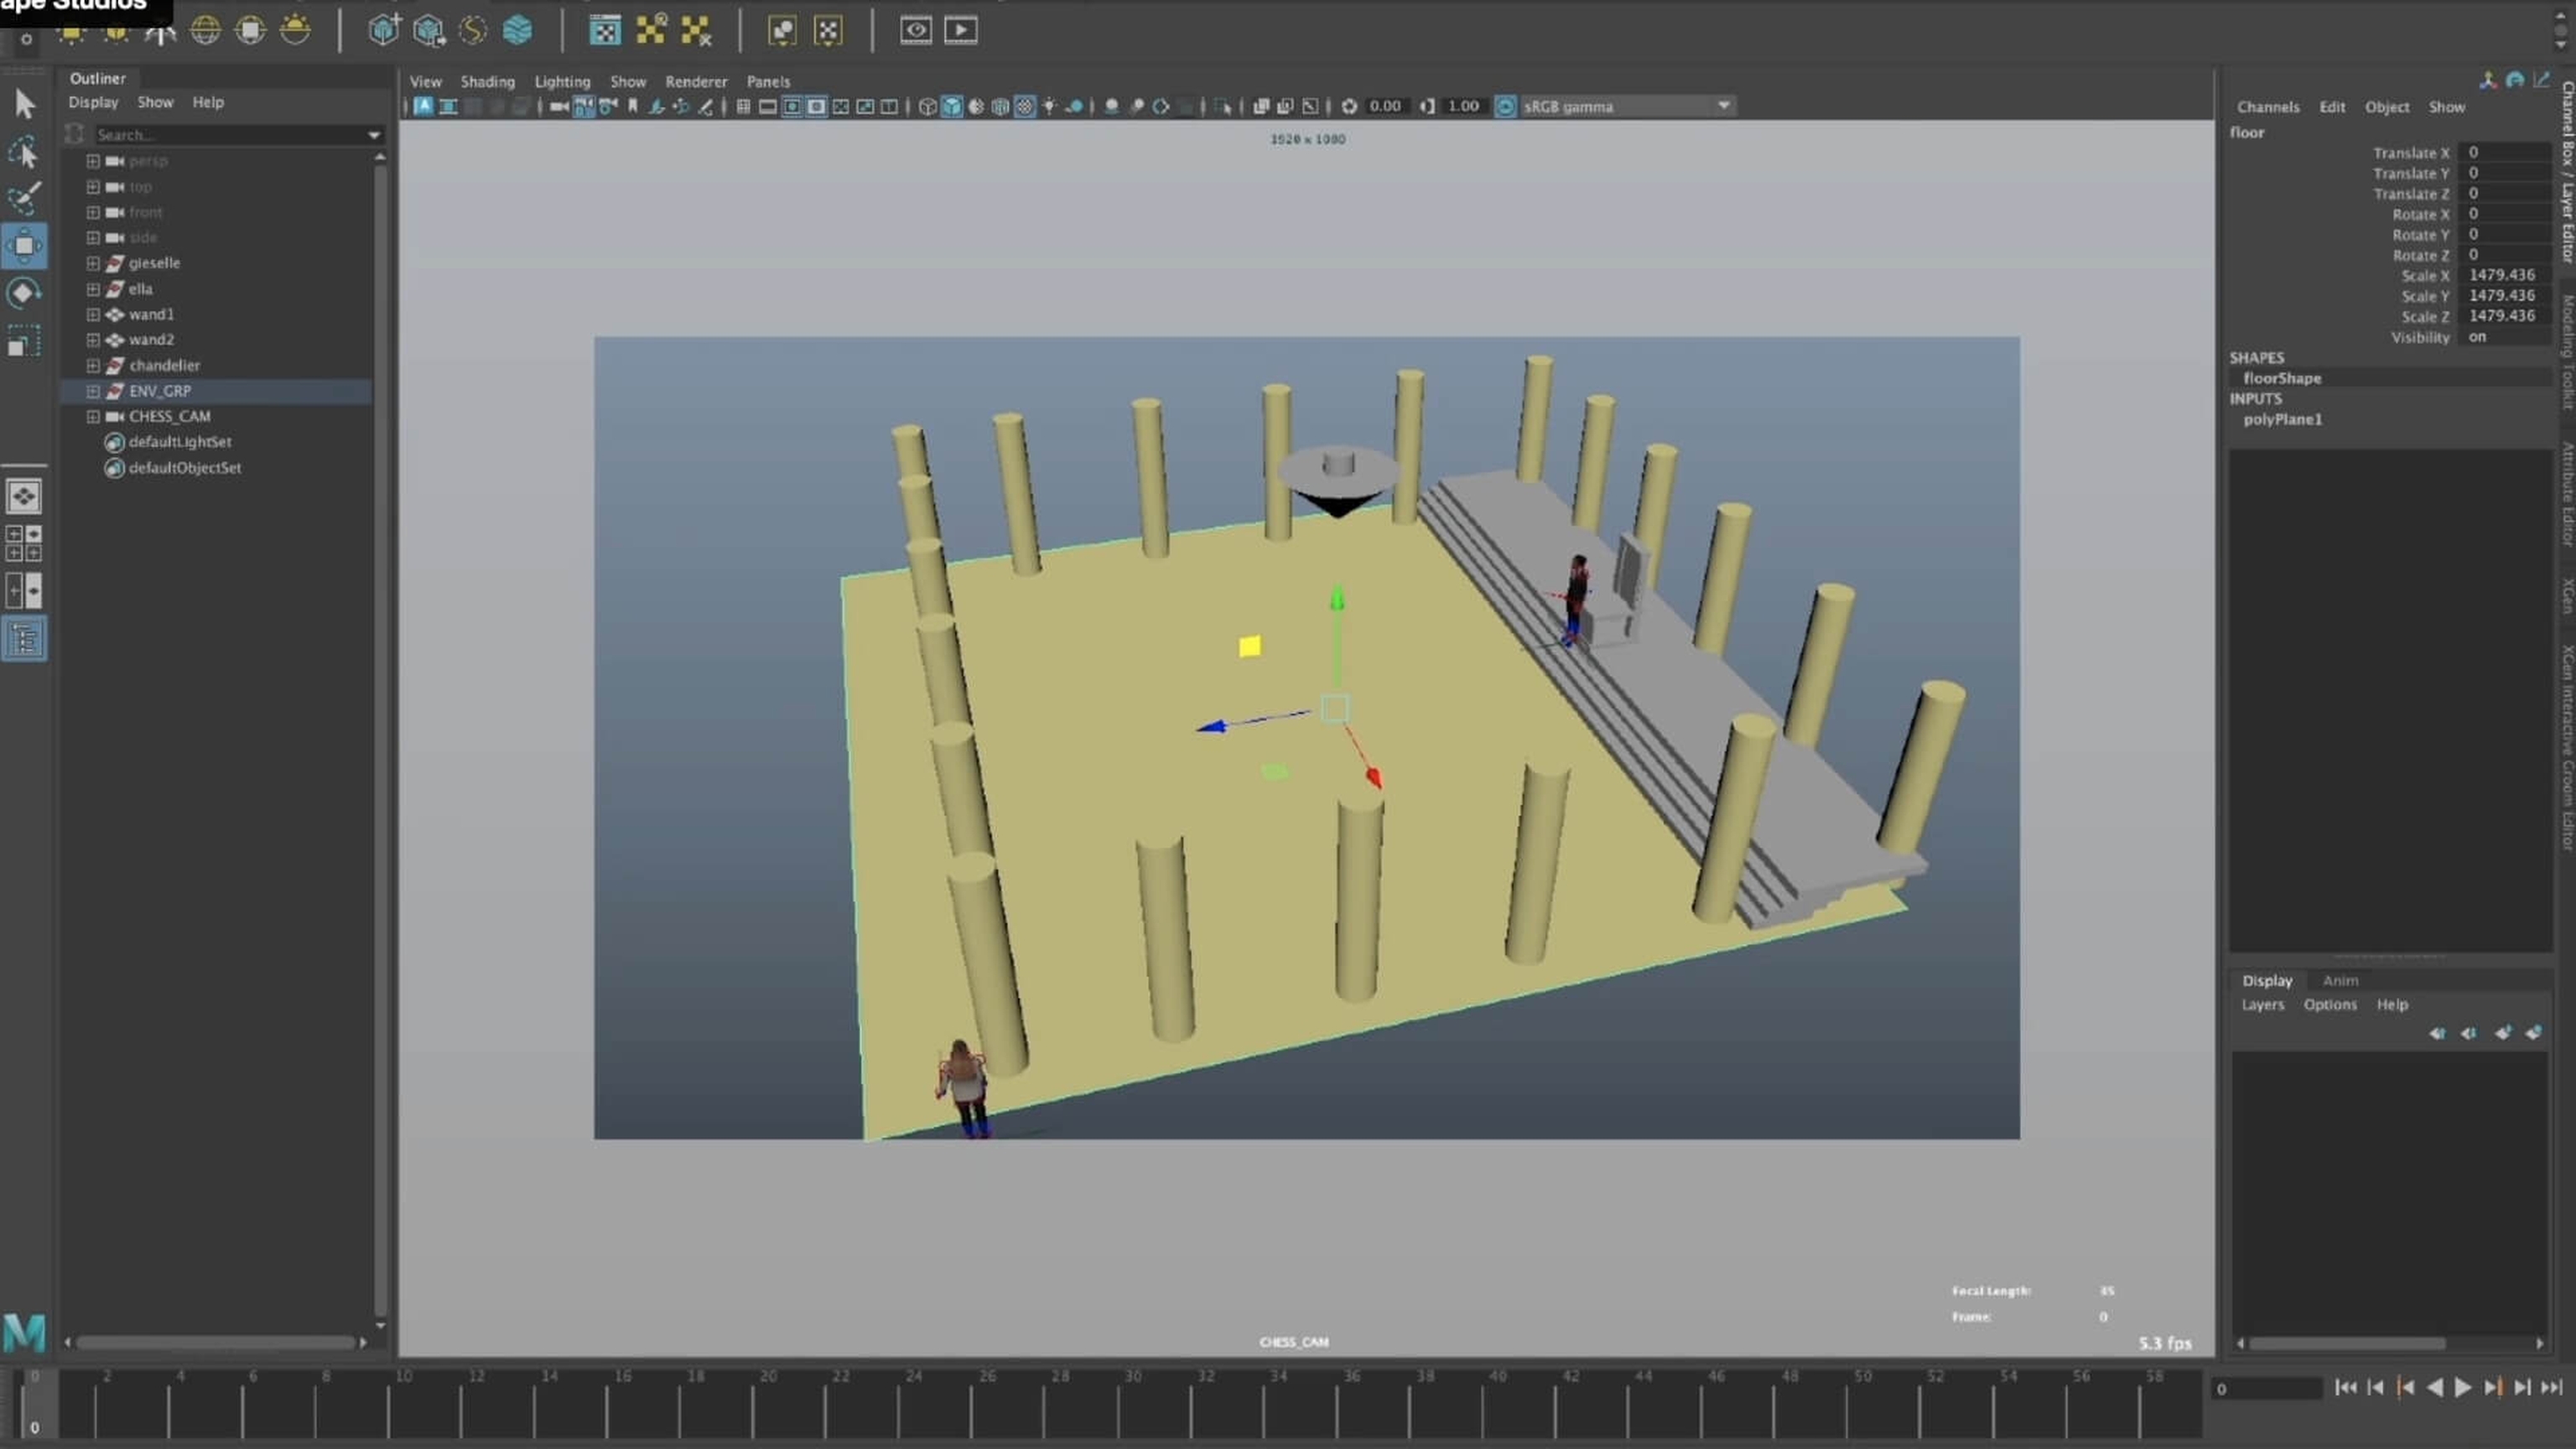 A screenshot shows a previsualisation tutorial showing two figures in a room with pillars